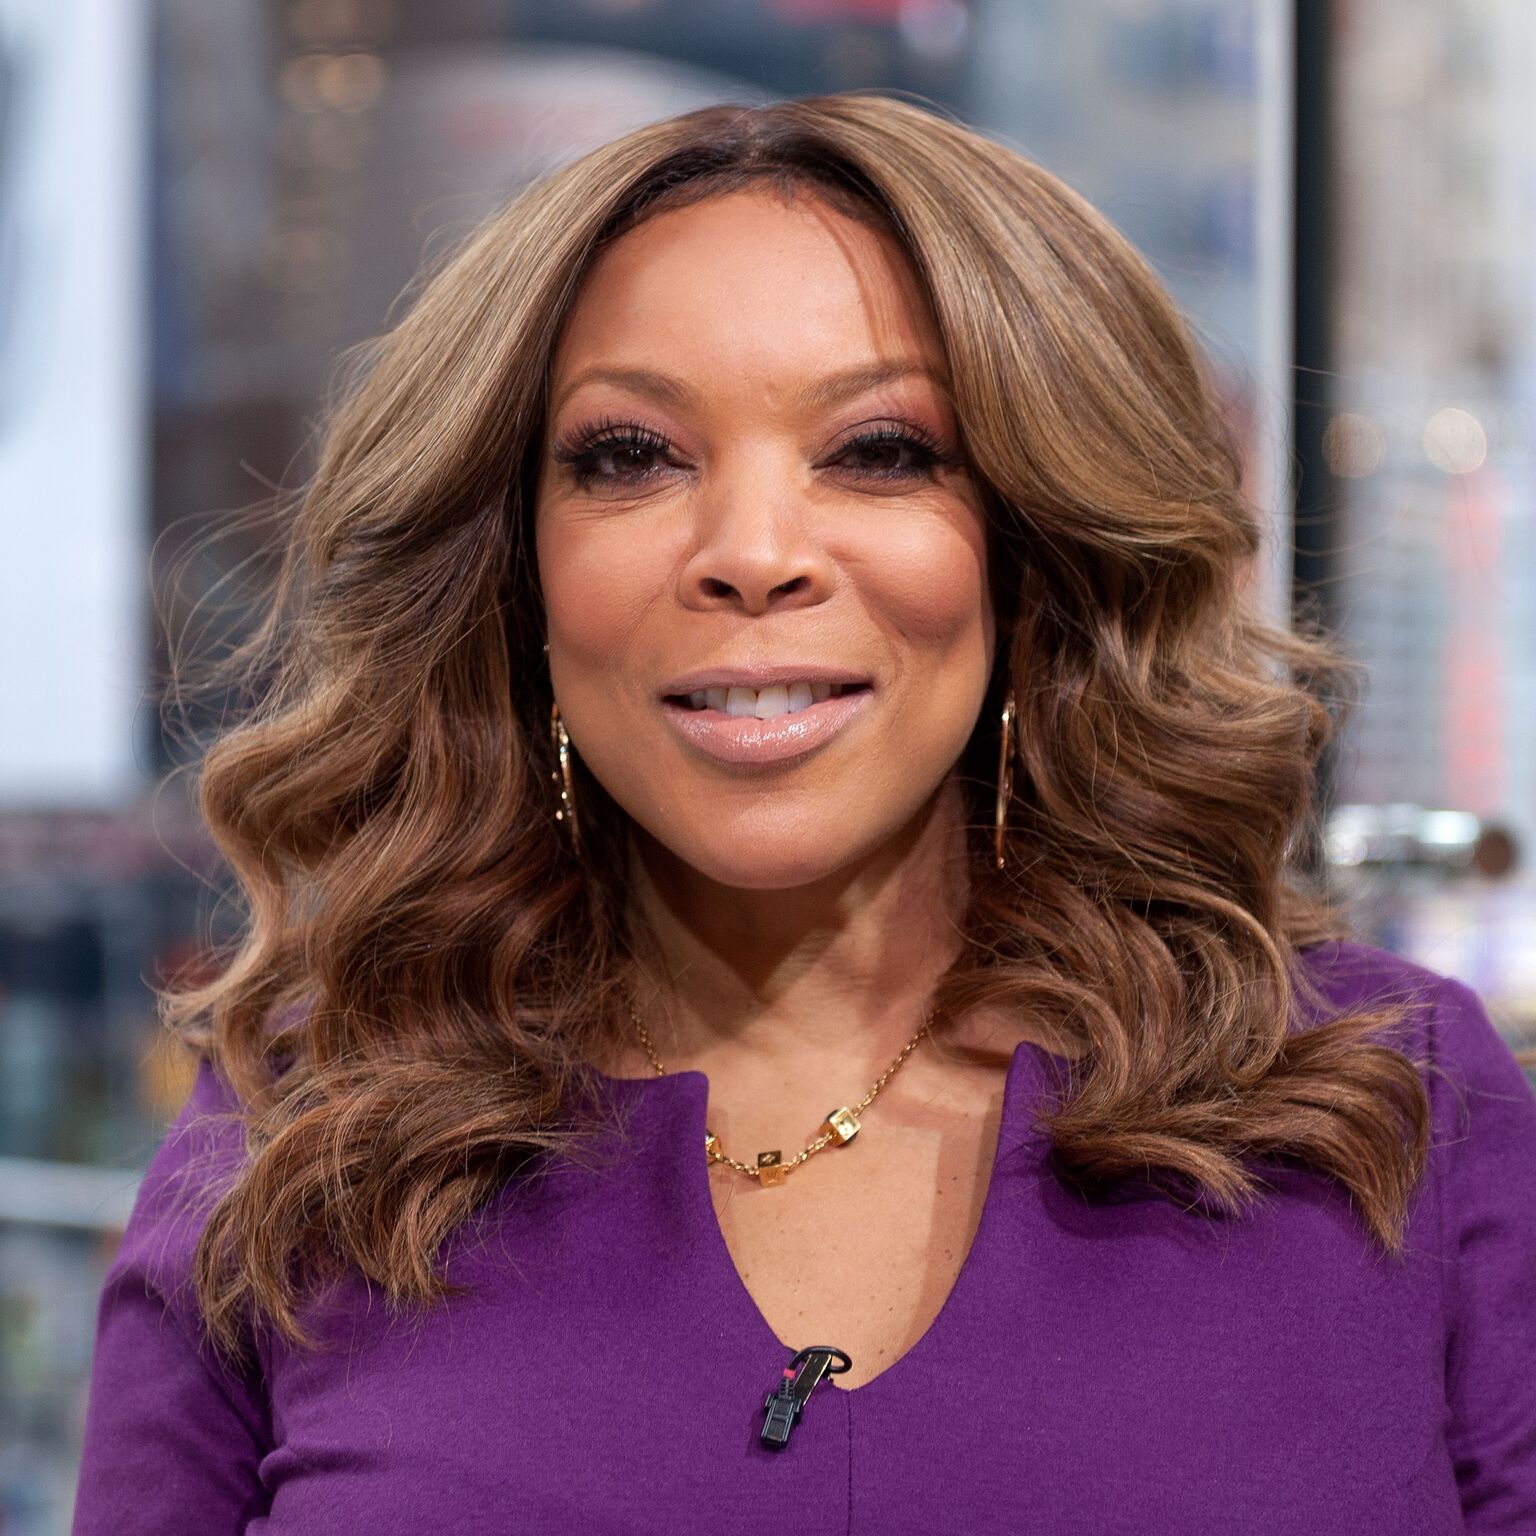 Wendy Williams visits "Extra" at their New York studios at H&M in Times Square on January 21, 2015. | Photo: Getty Images